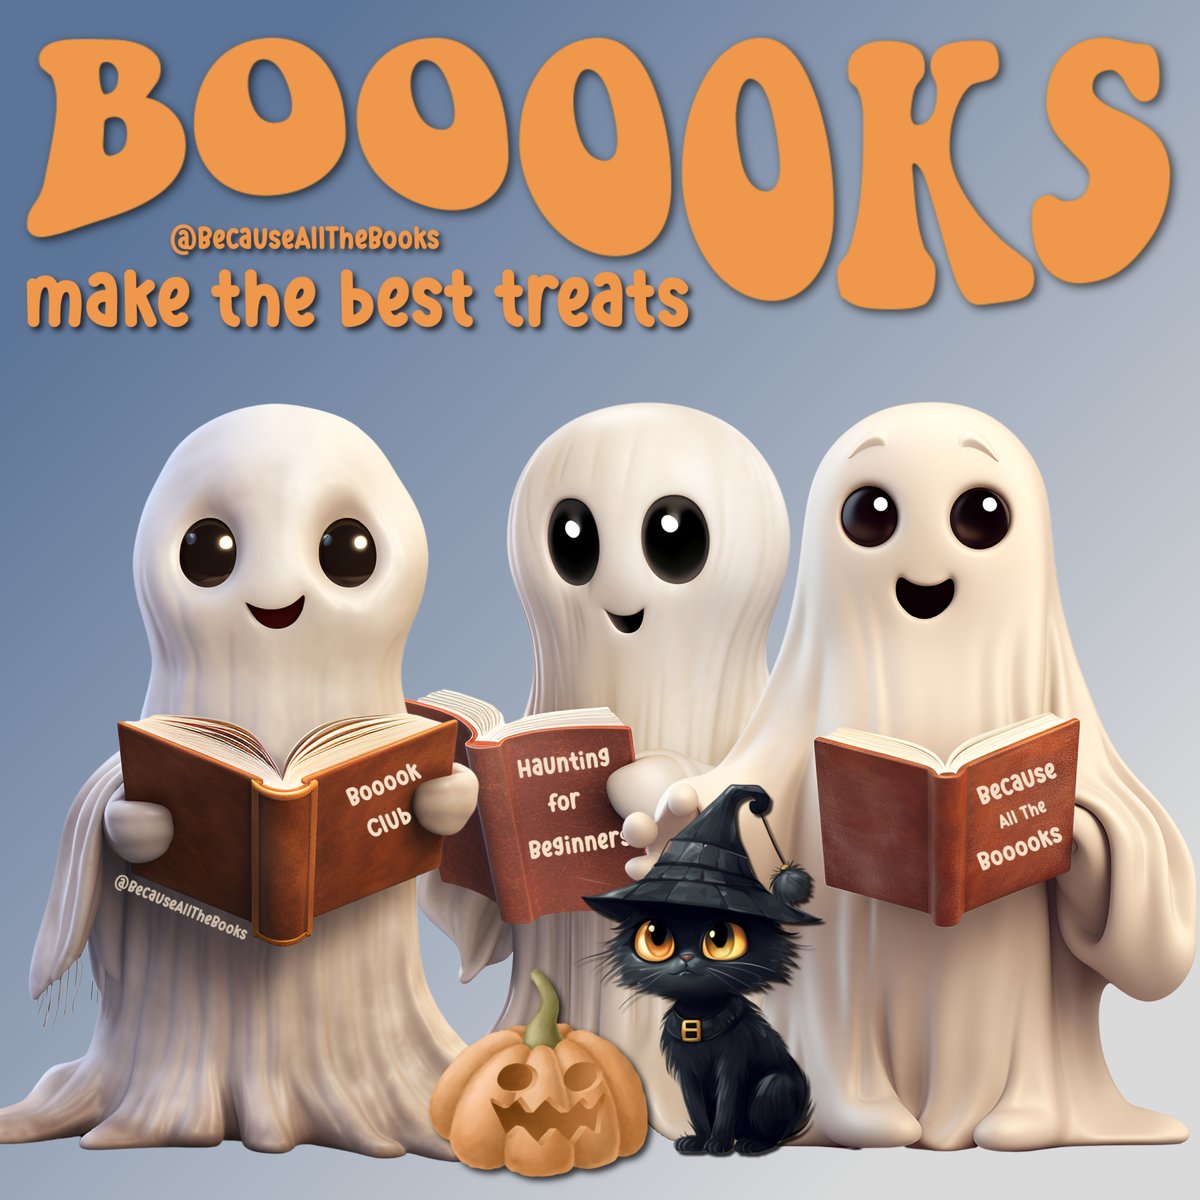 Books really do make the best treats!

#BecauseAllTheBooks #GhostBooks #BookClub